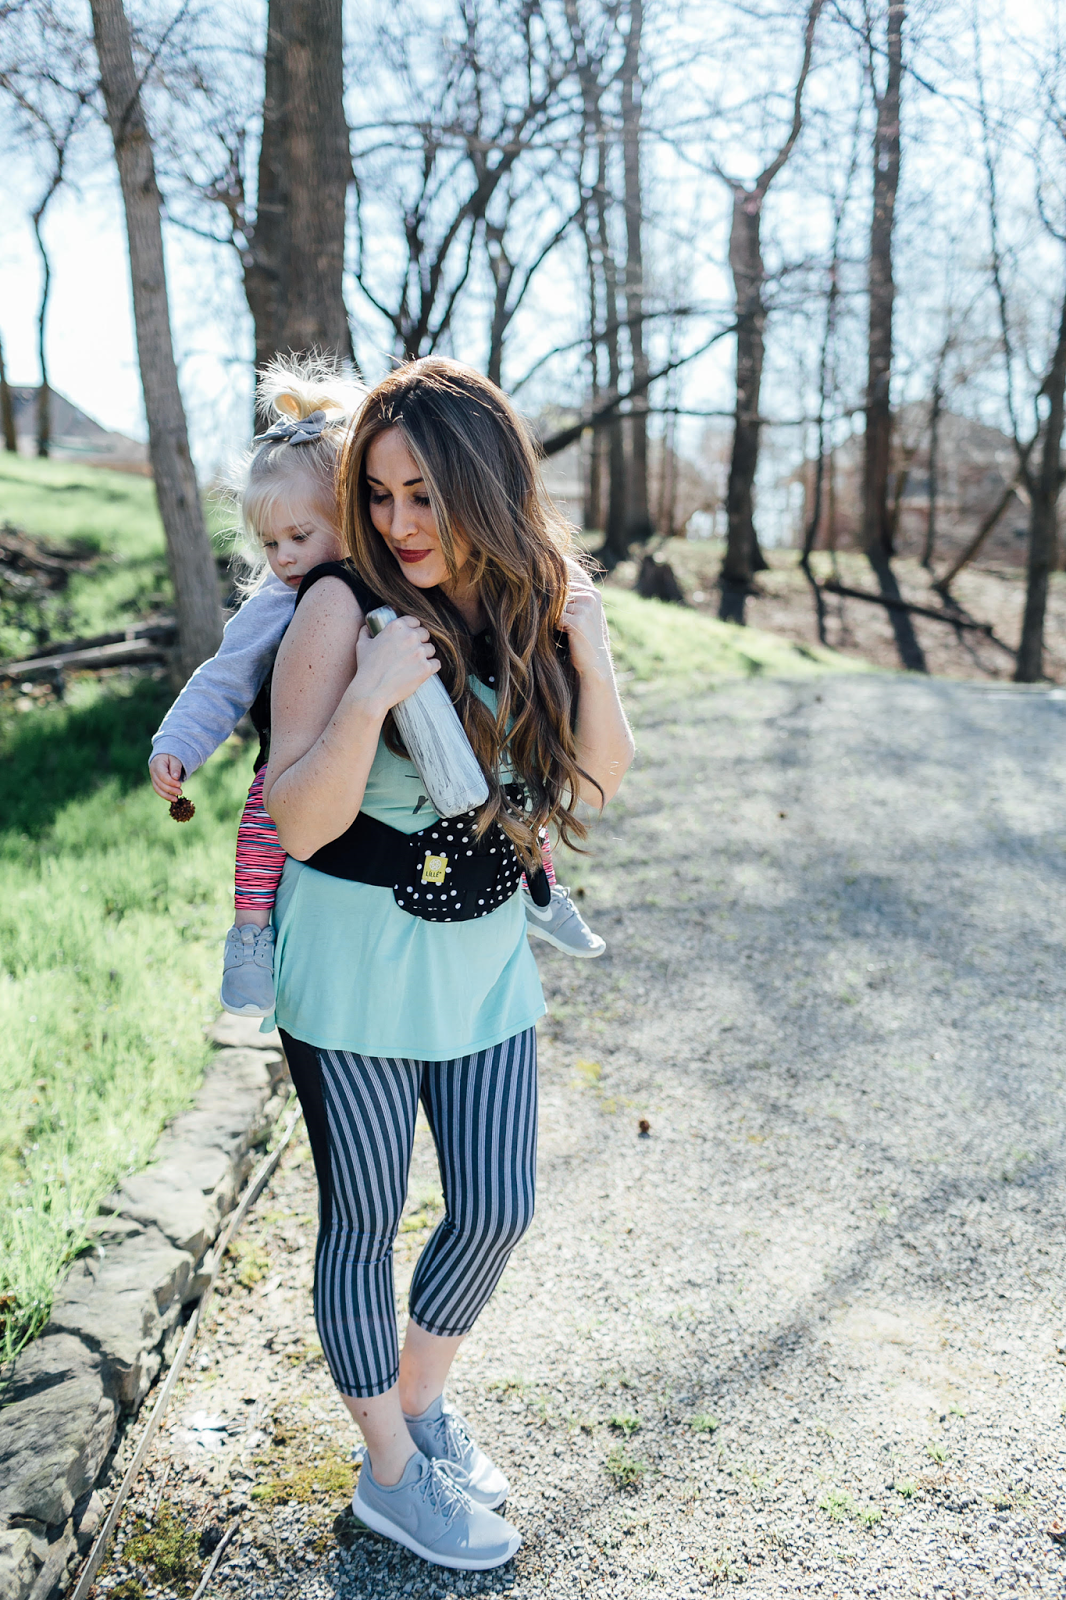 How To Workout With Kids by Walking in Memphis in High Heels: Babywearing